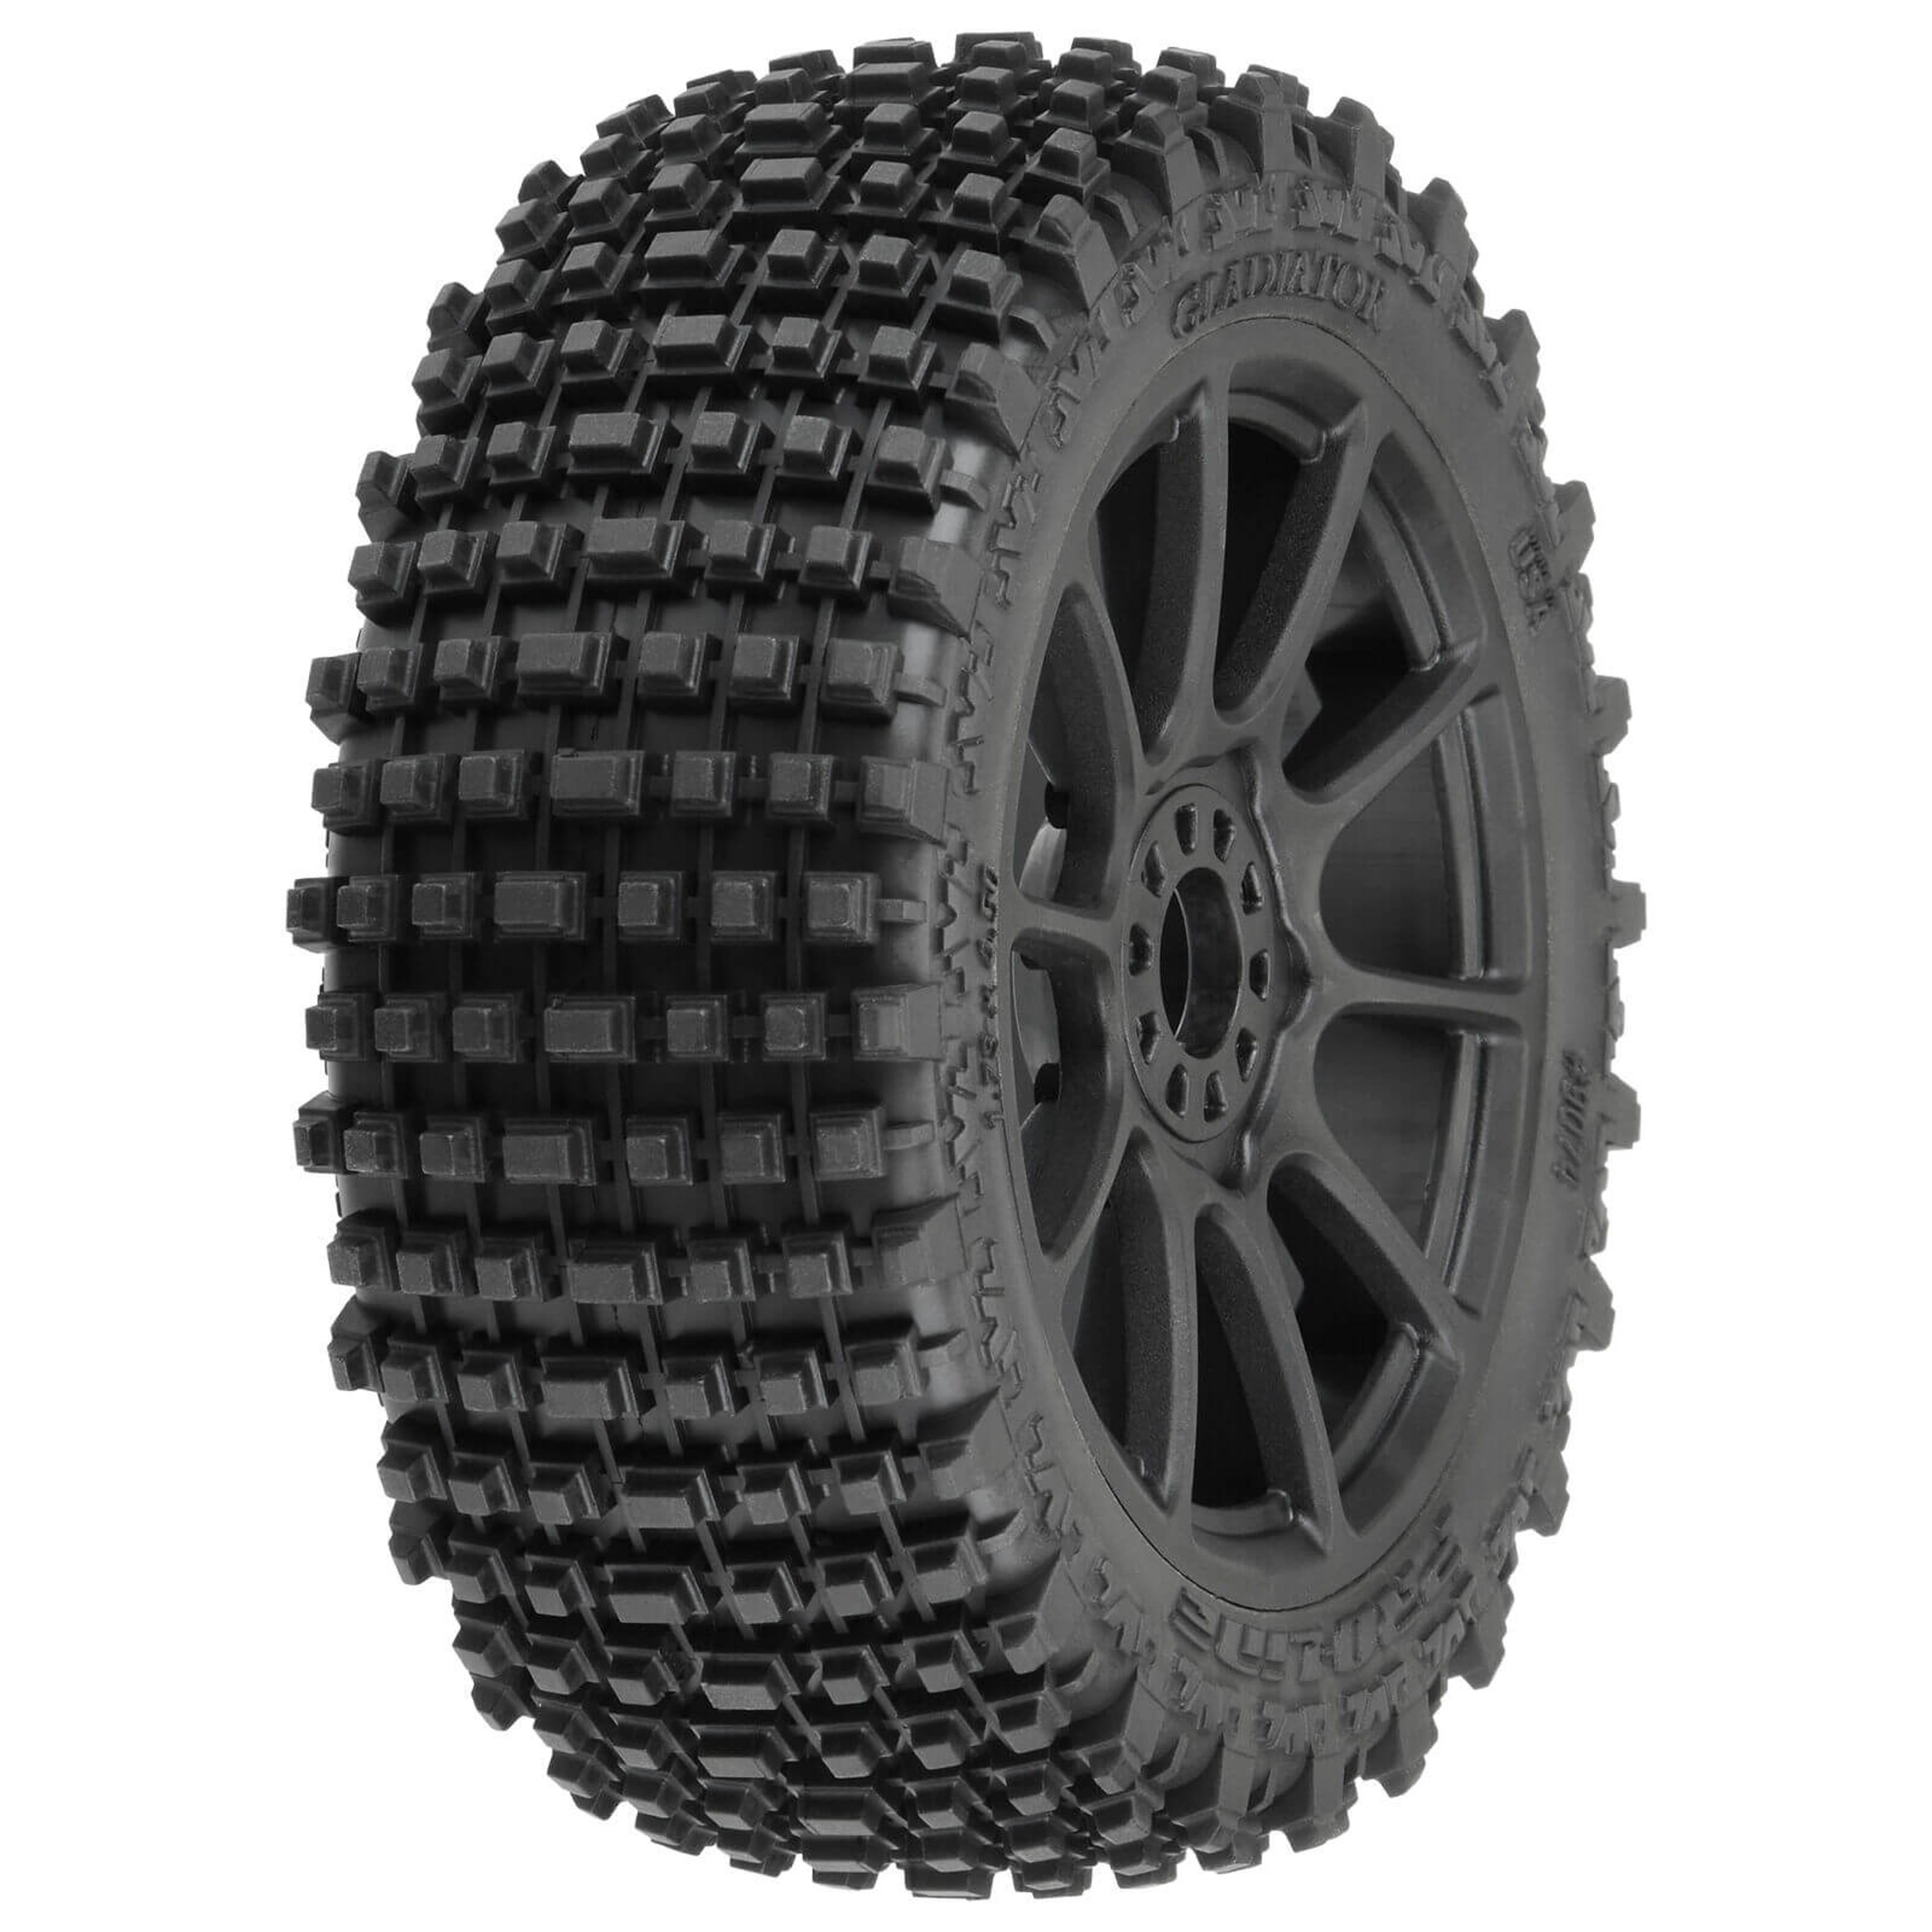 Gladiator M2 Fr/Rr Buggy Tires Mounted 17mm Black Mach 10 (1 Pair)